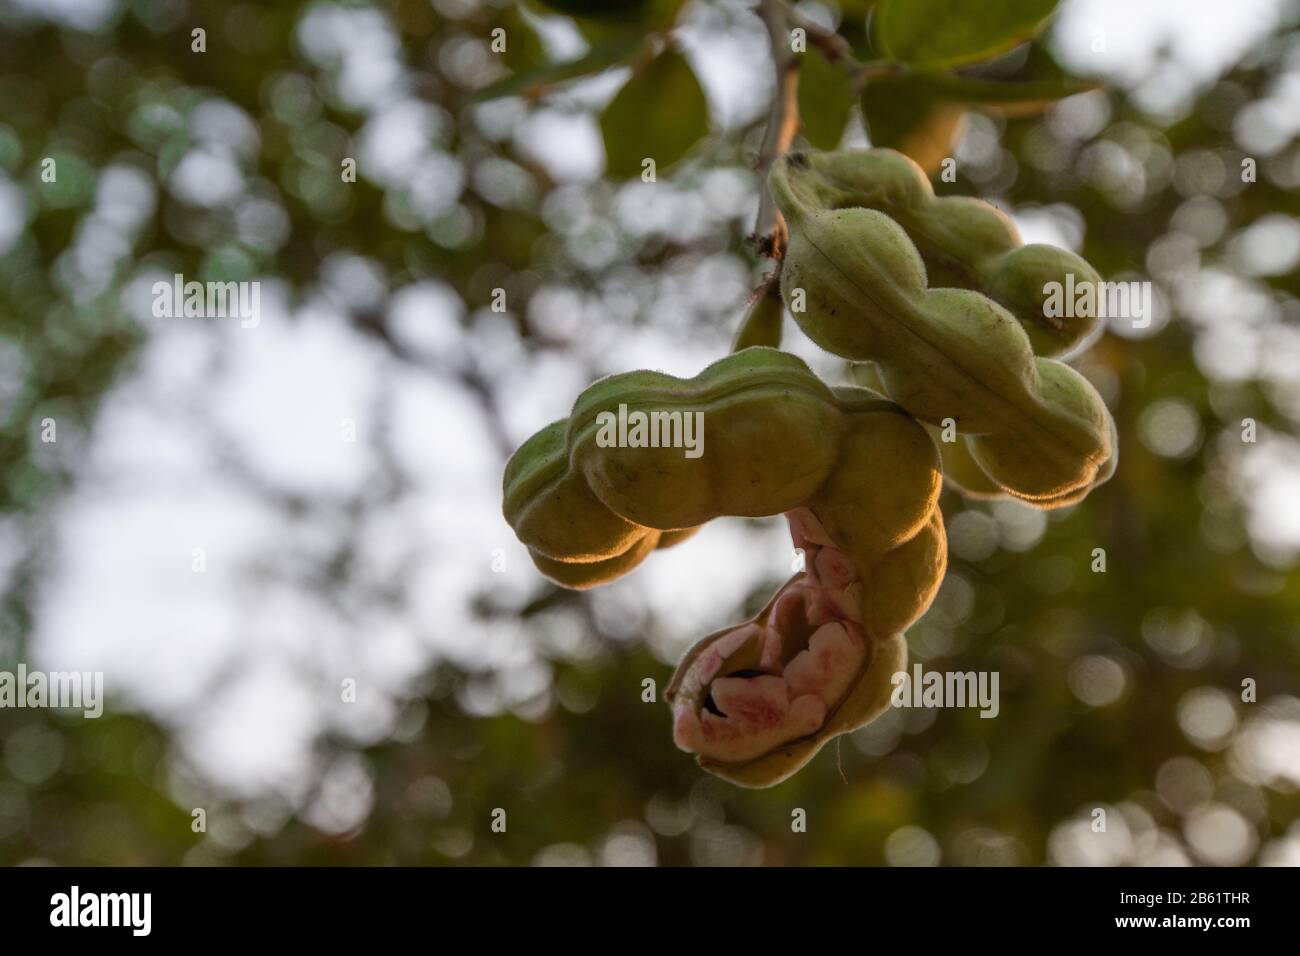 A view of ripe Pithecellobium dulce fruits on a tree.The harvest of the Pithecellobium dulce also known as Madras Thorn is from December to March. Stock Photo